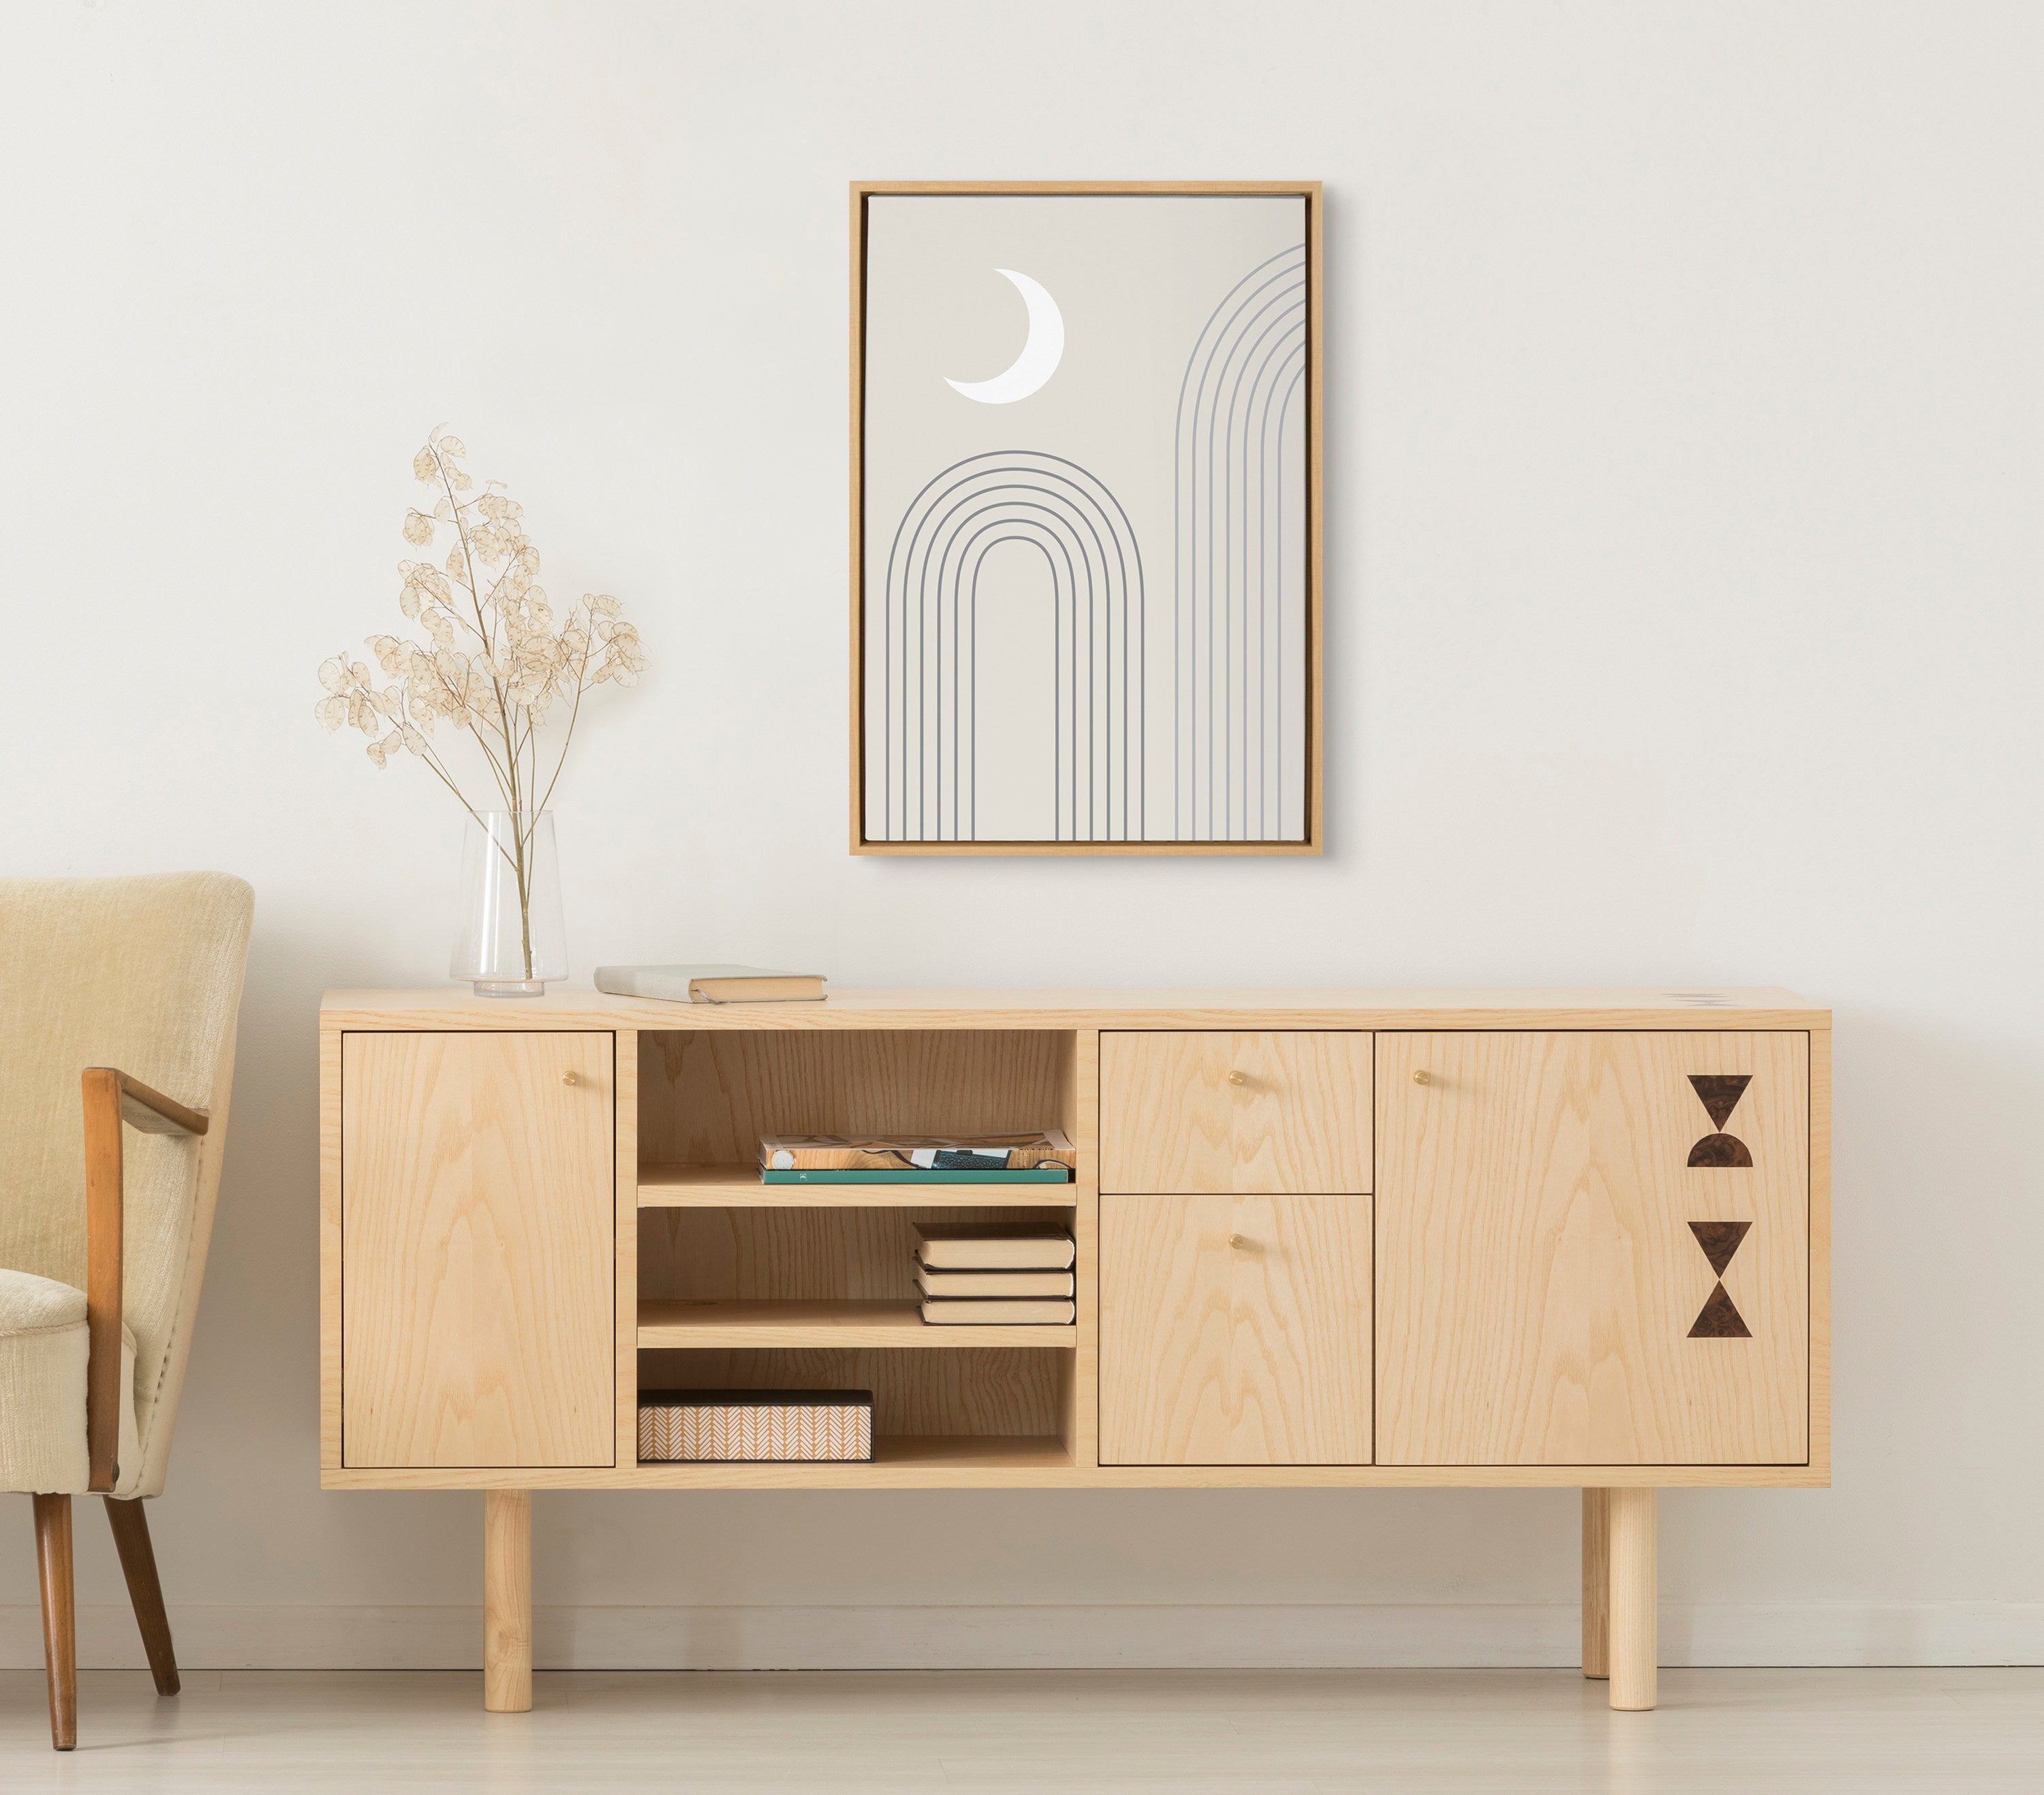 Sylvie Crescent Moon over the Mountains Framed Canvas by The Creative Bunch Studio